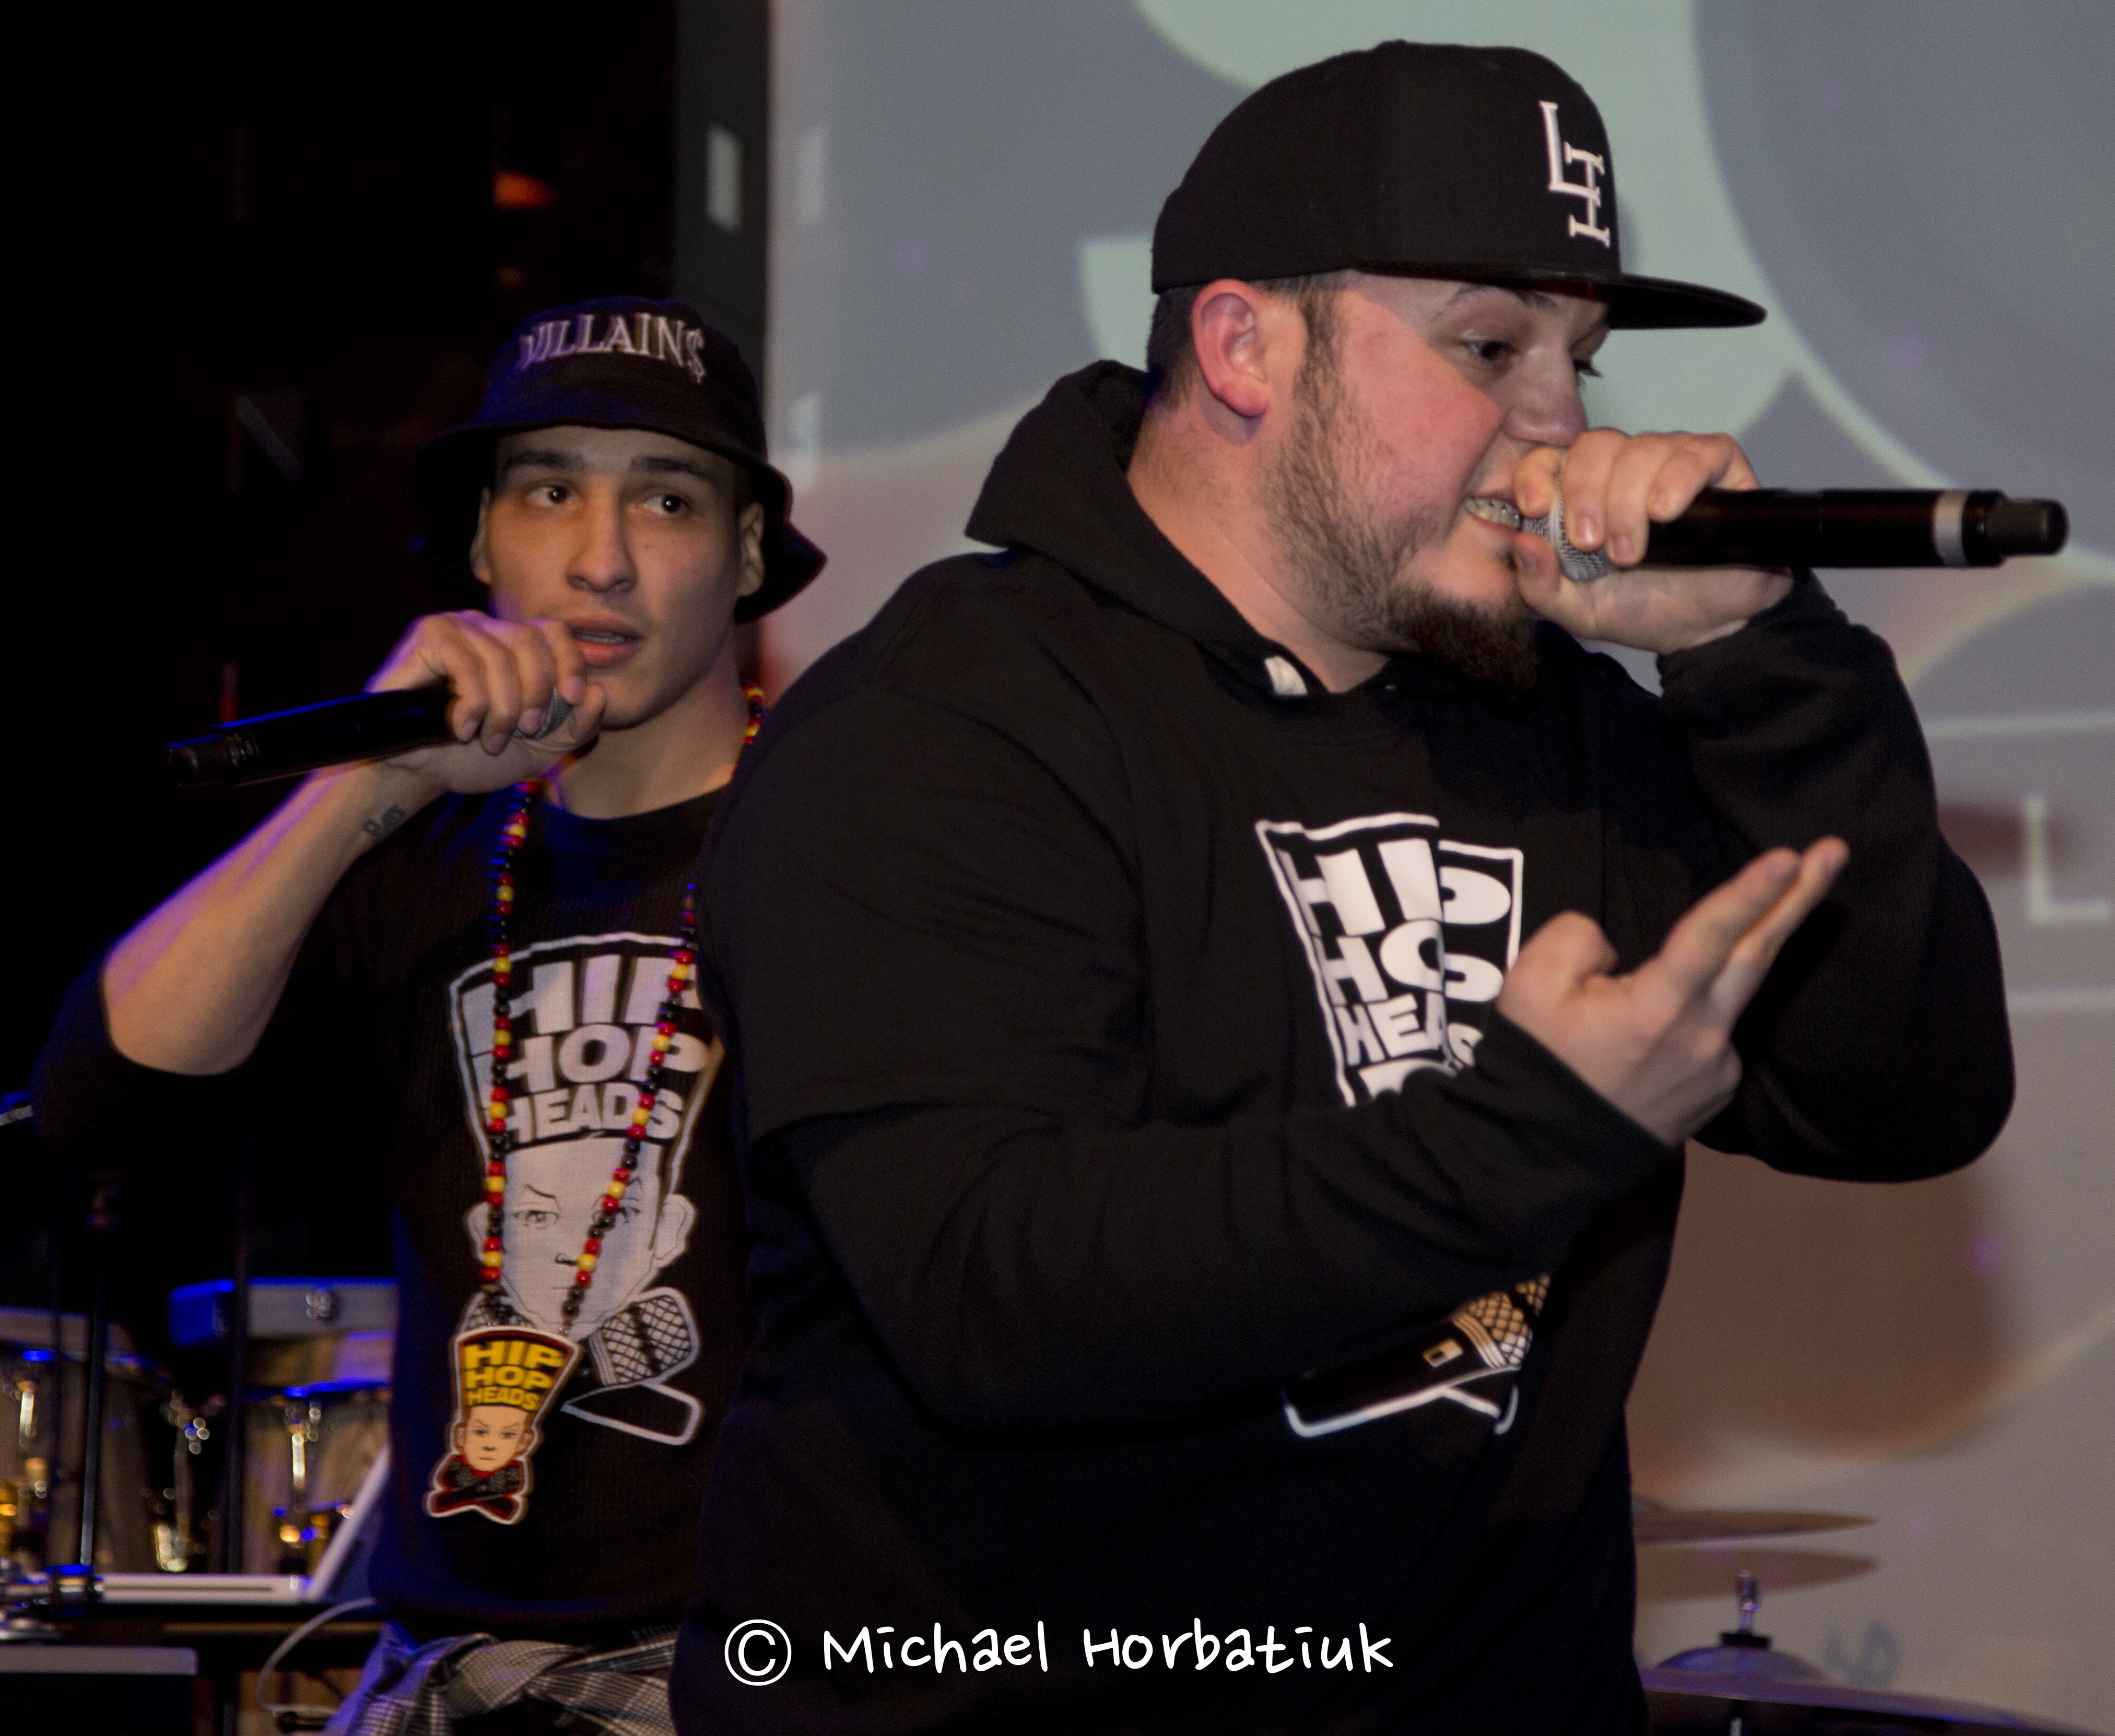 Legendary Cypher with R.A. The Rugged Man and HipHopHeads at